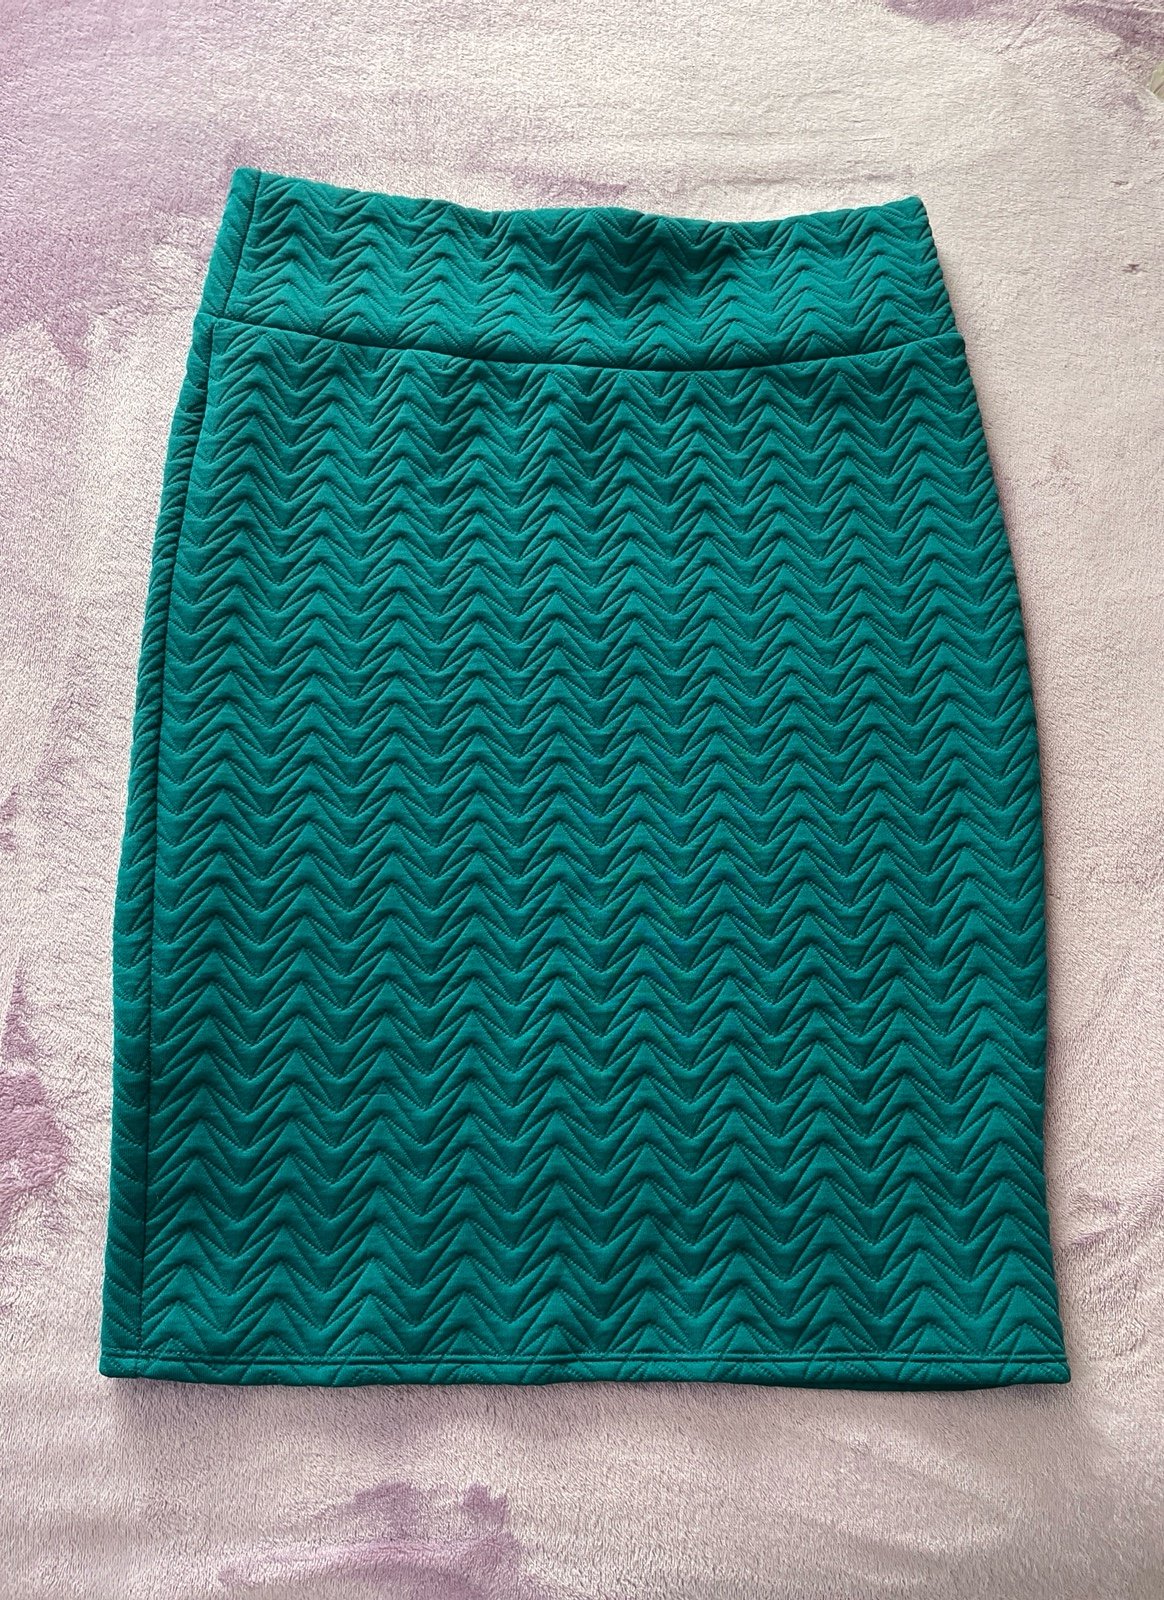 cheapest place to buy  Lularoe Cassie Skirt - Teal Quil